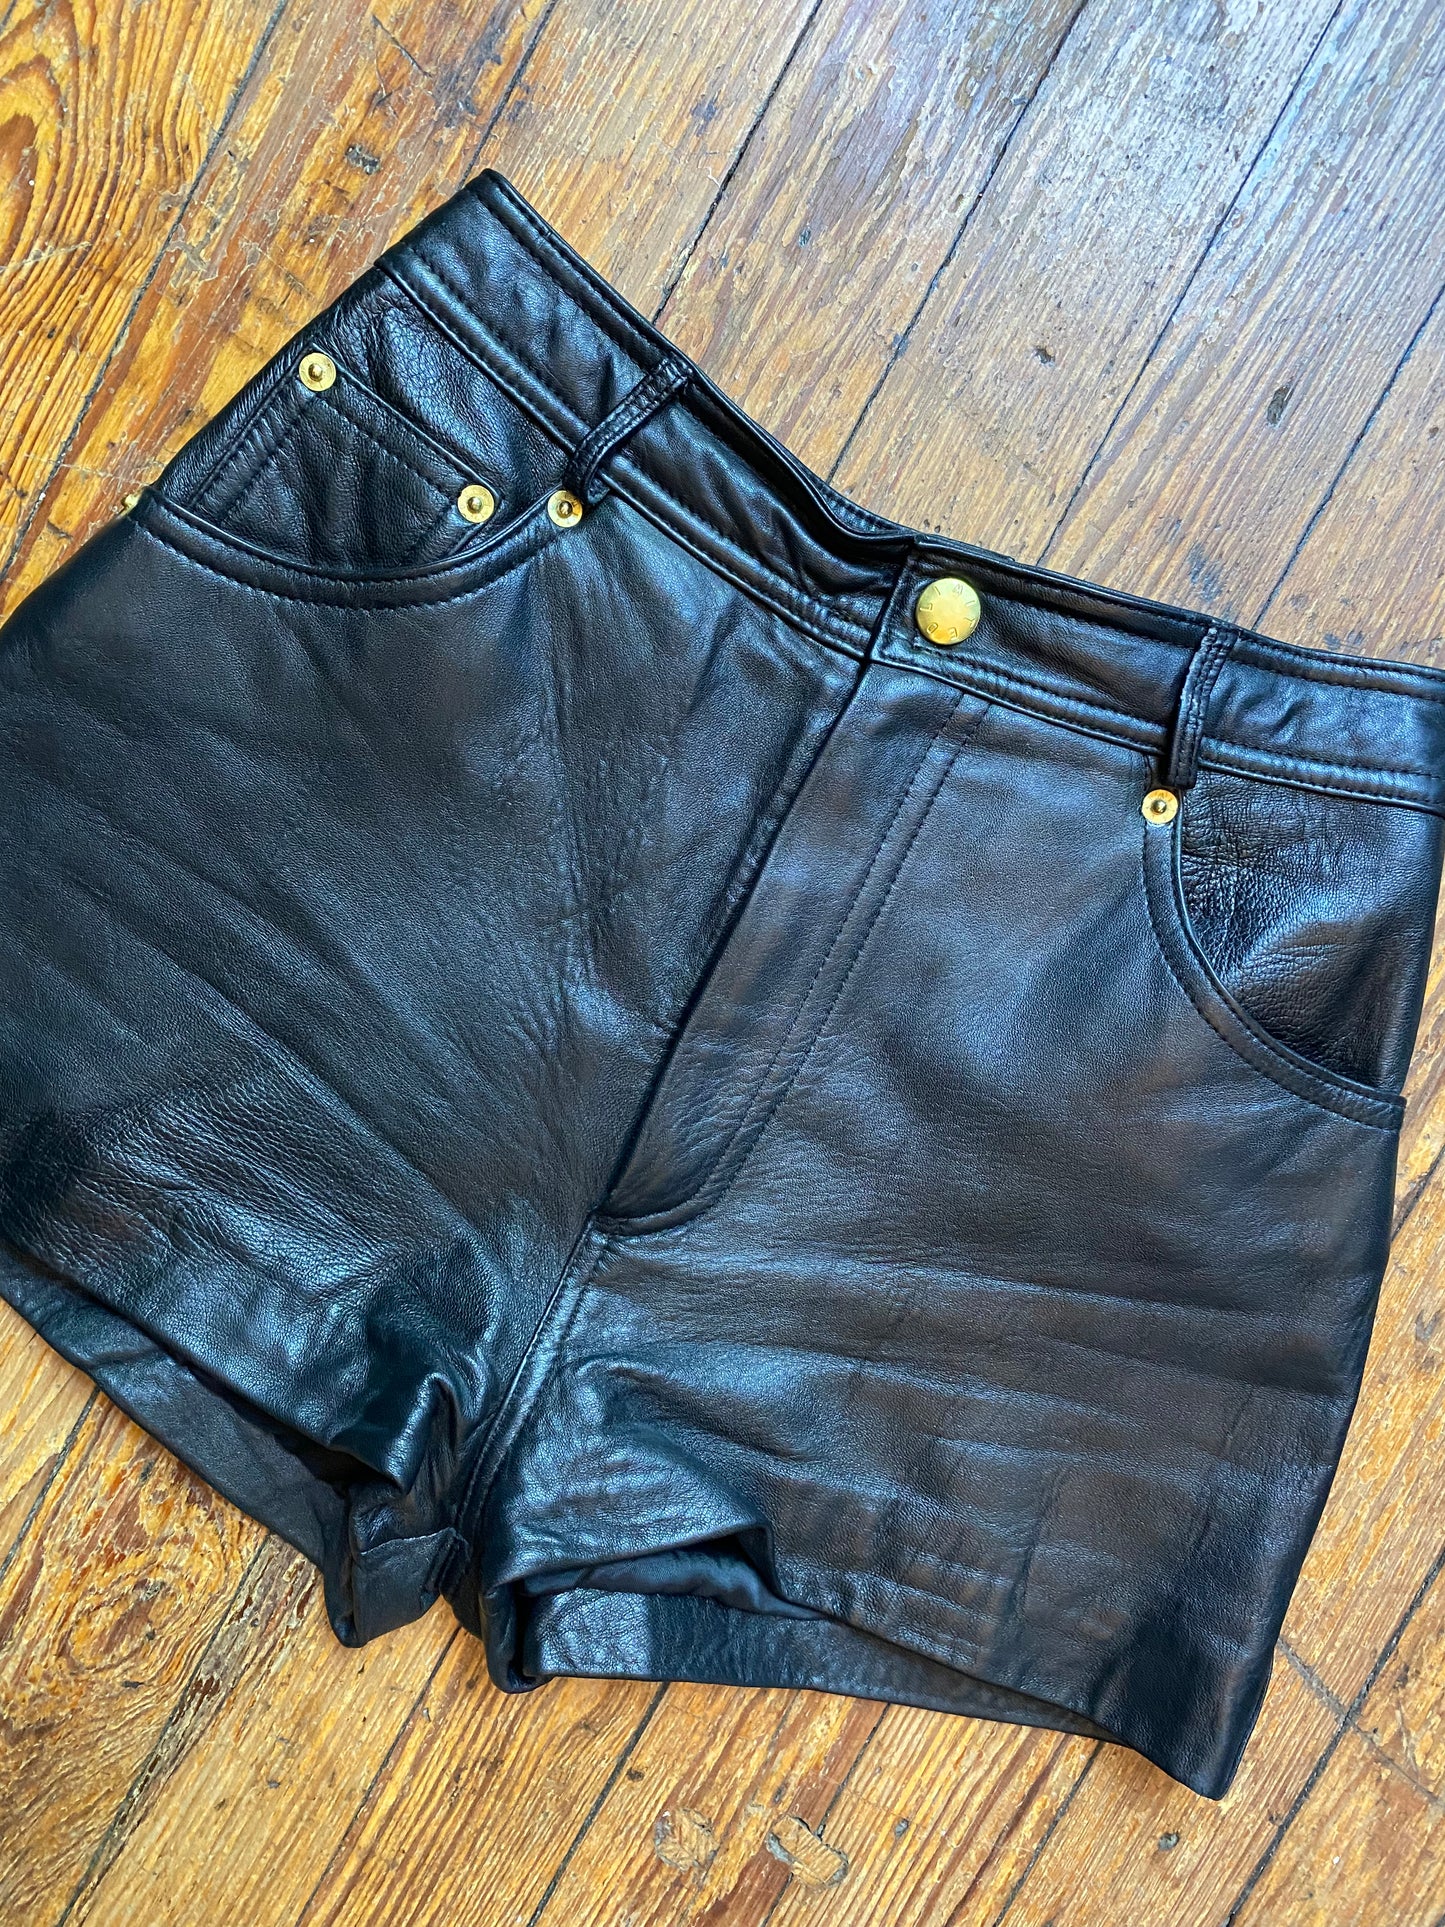 The Limited Lil Leather Booty Shorts